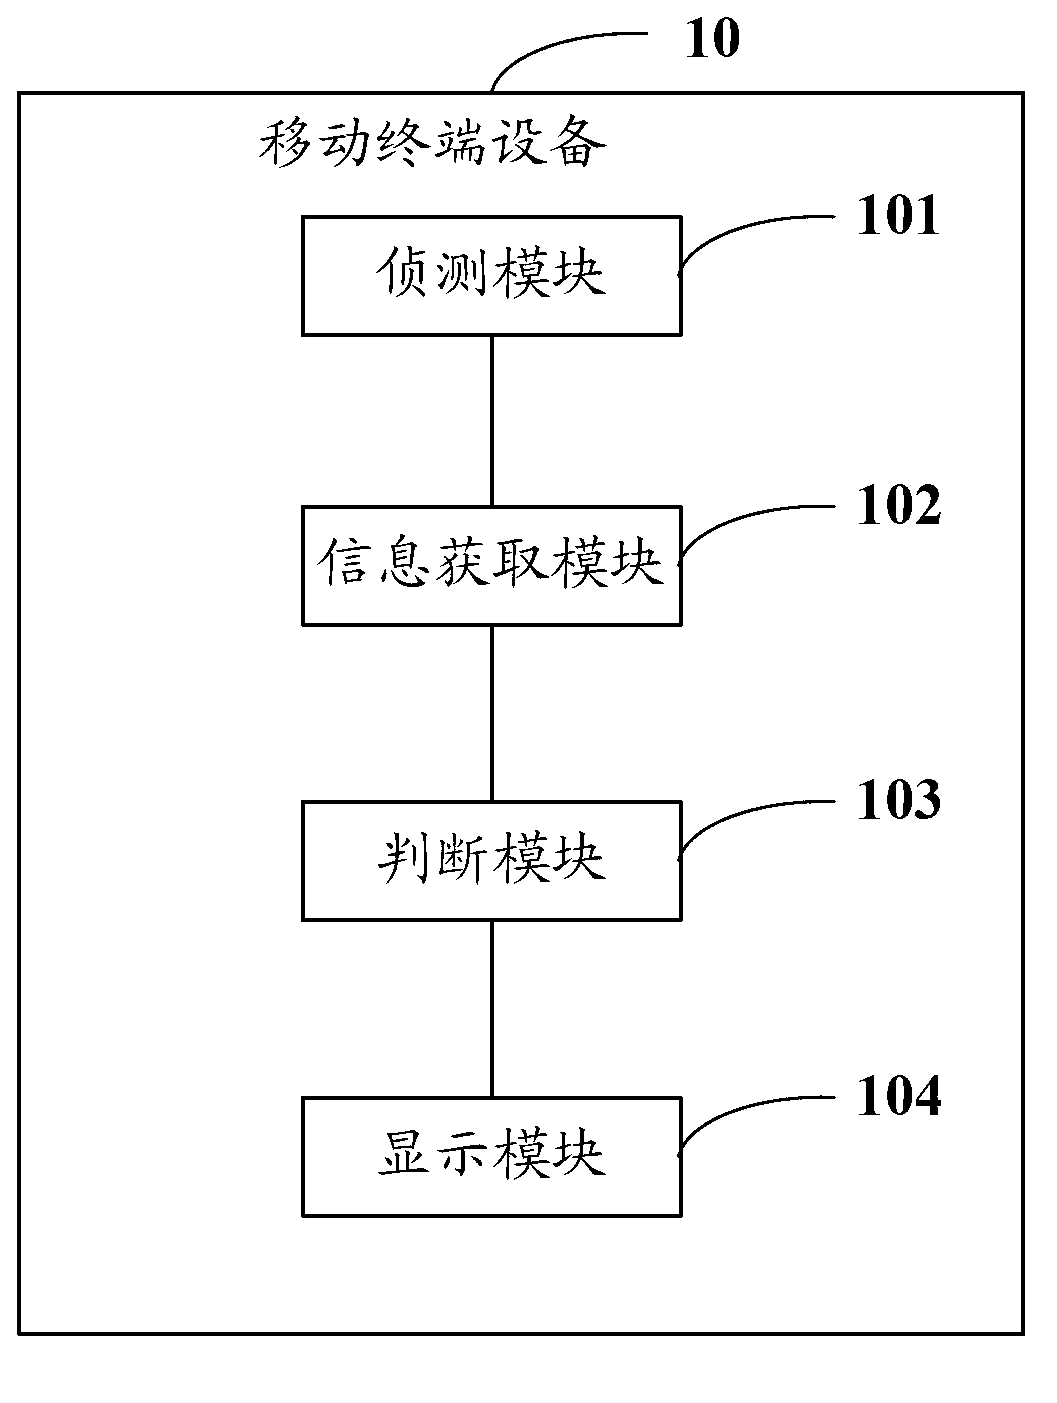 Mobile terminal device and caller identification method for same